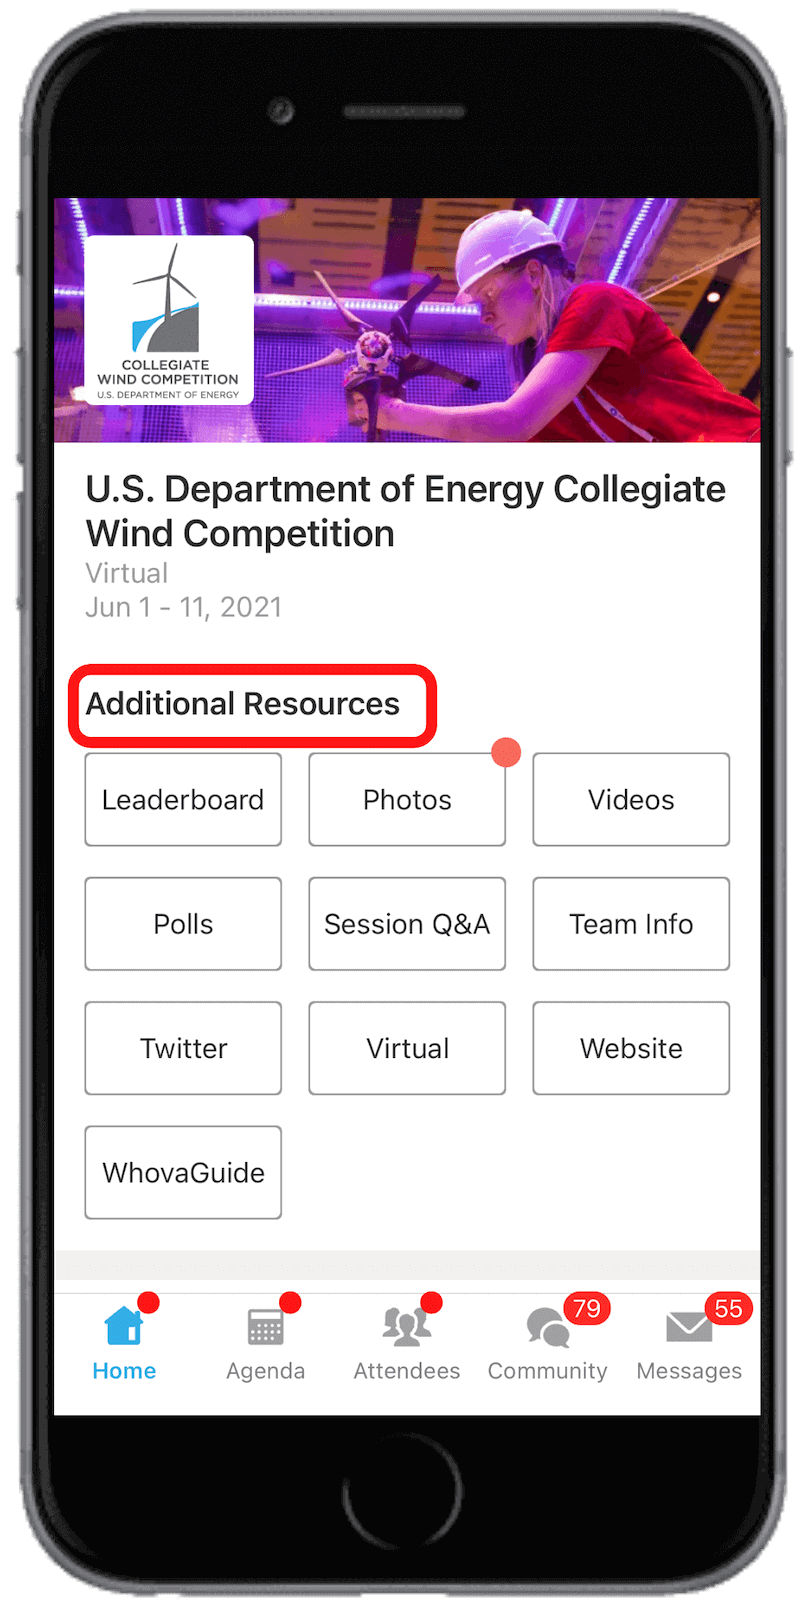 U.S. Department of Energy Collegiate Wind Competition 2021 - Resources